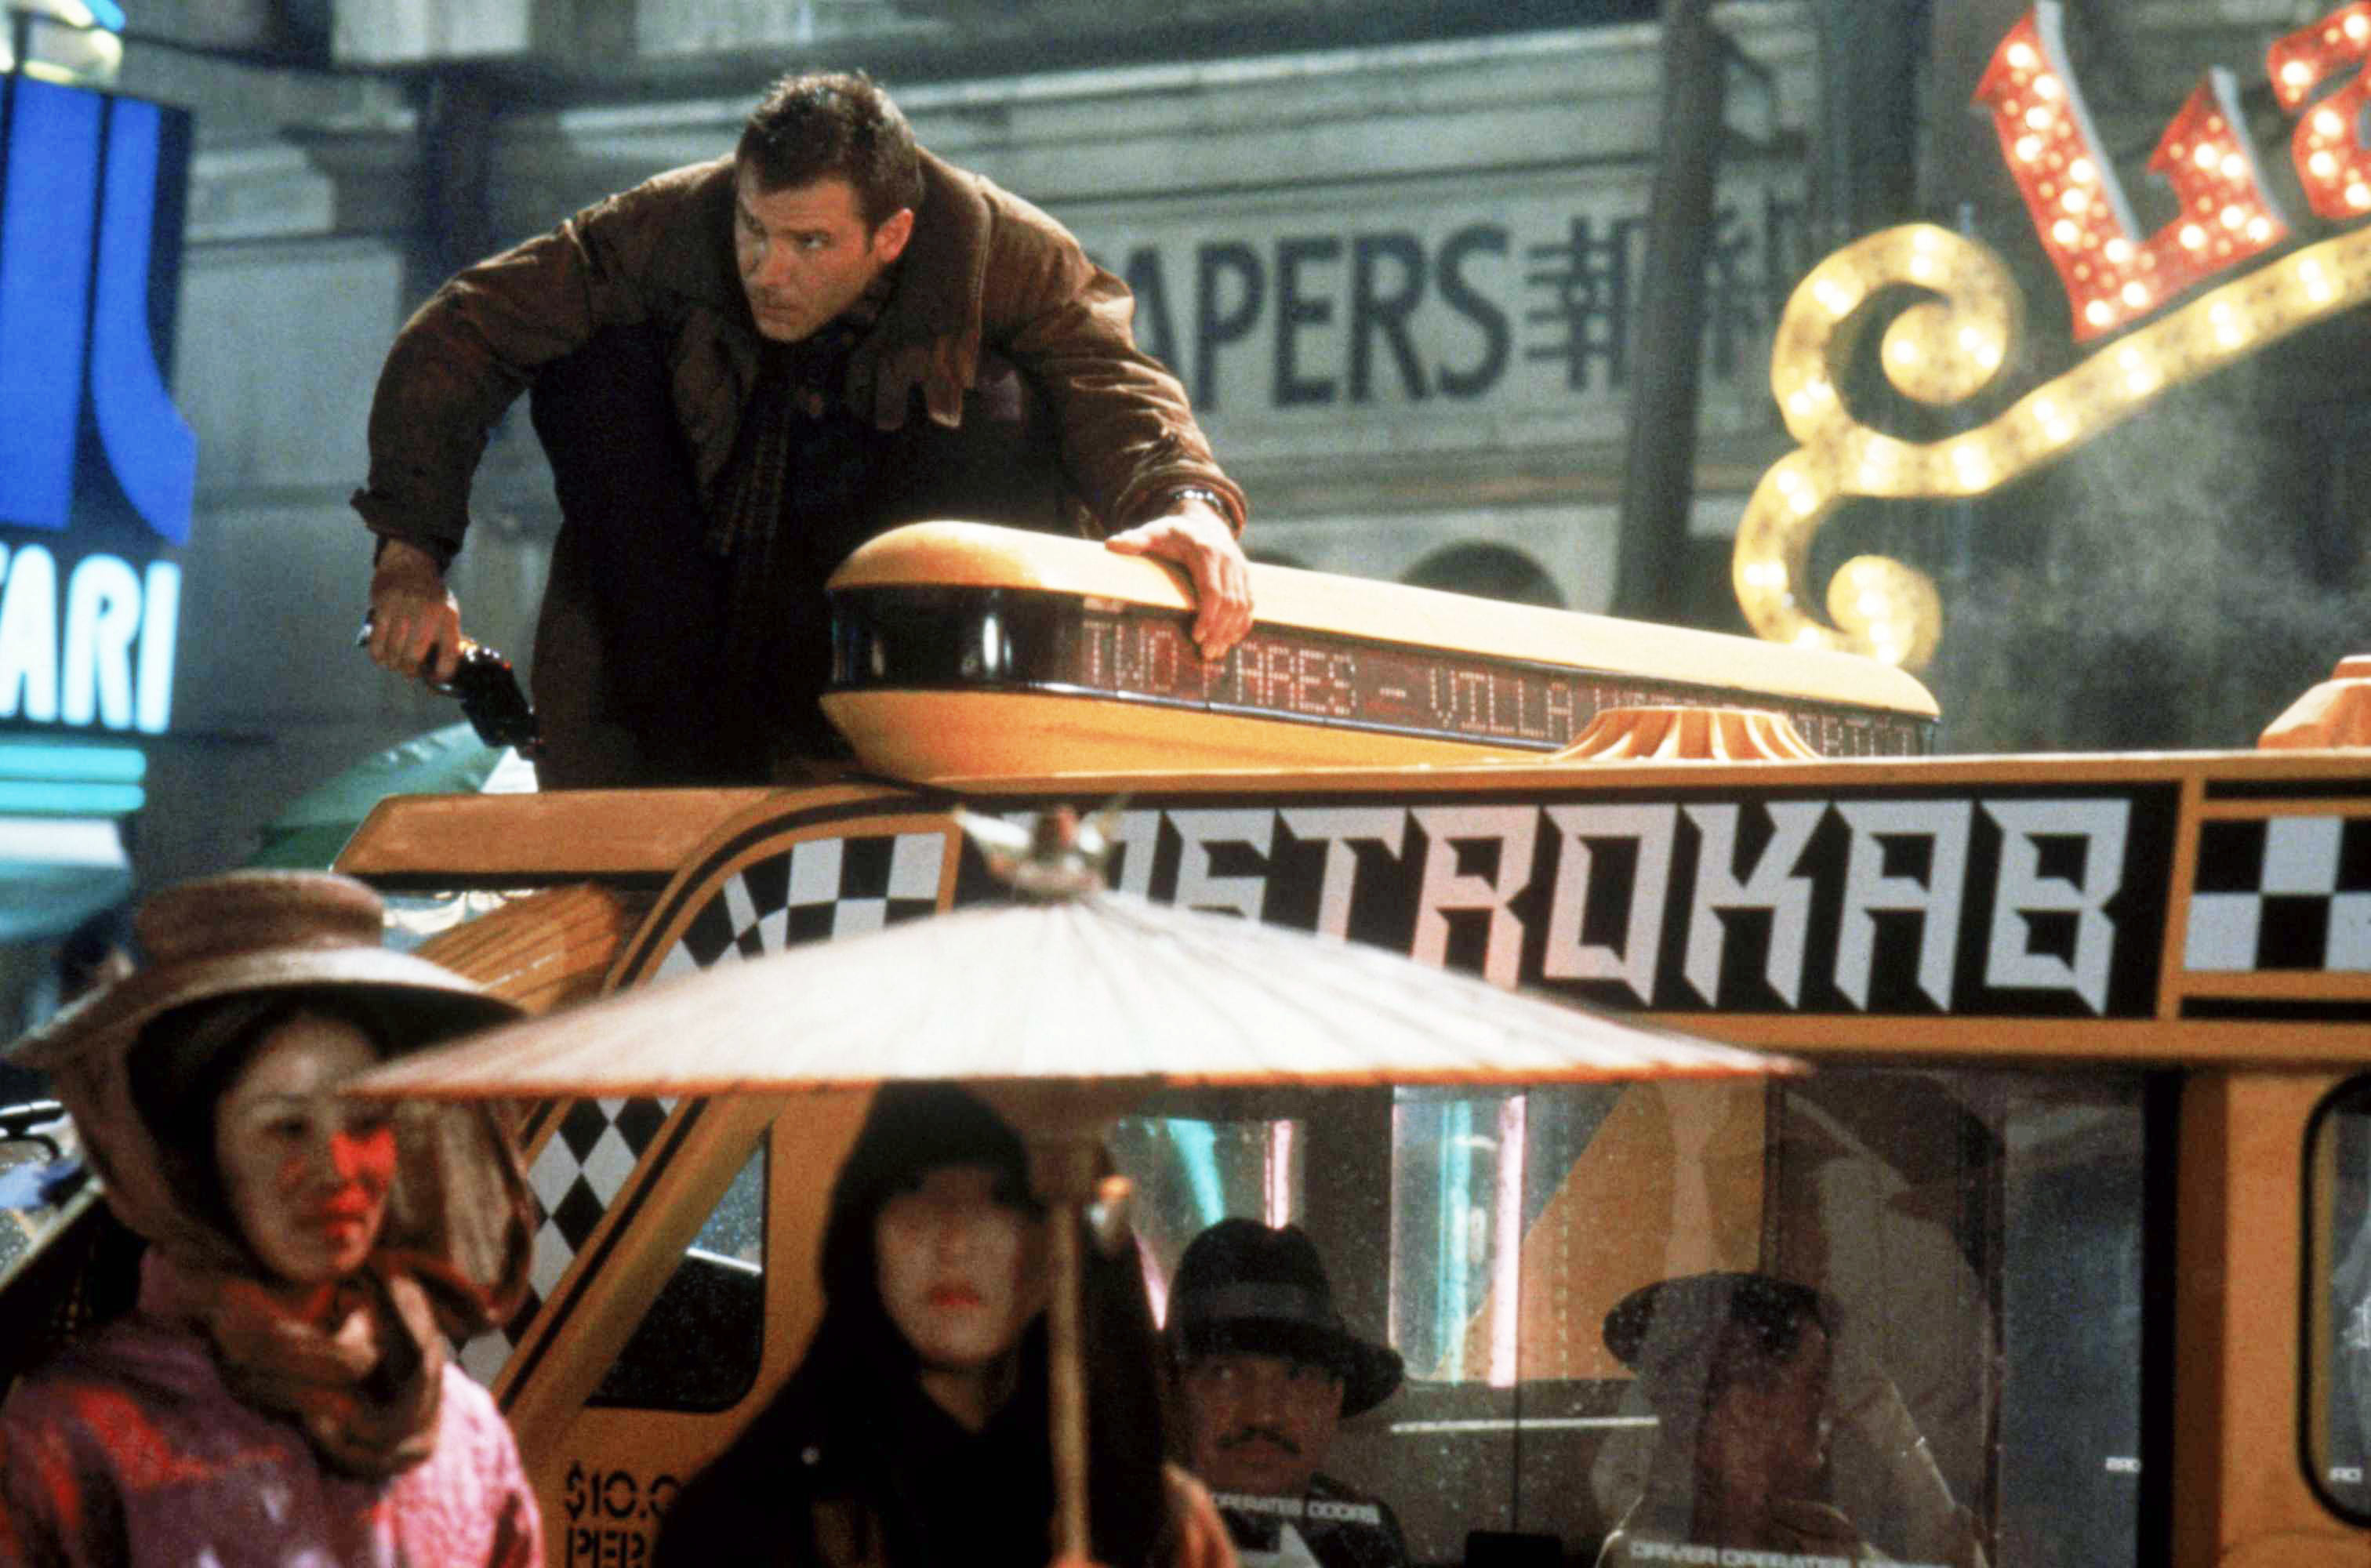 Rick atop taxi in a bustling city scene